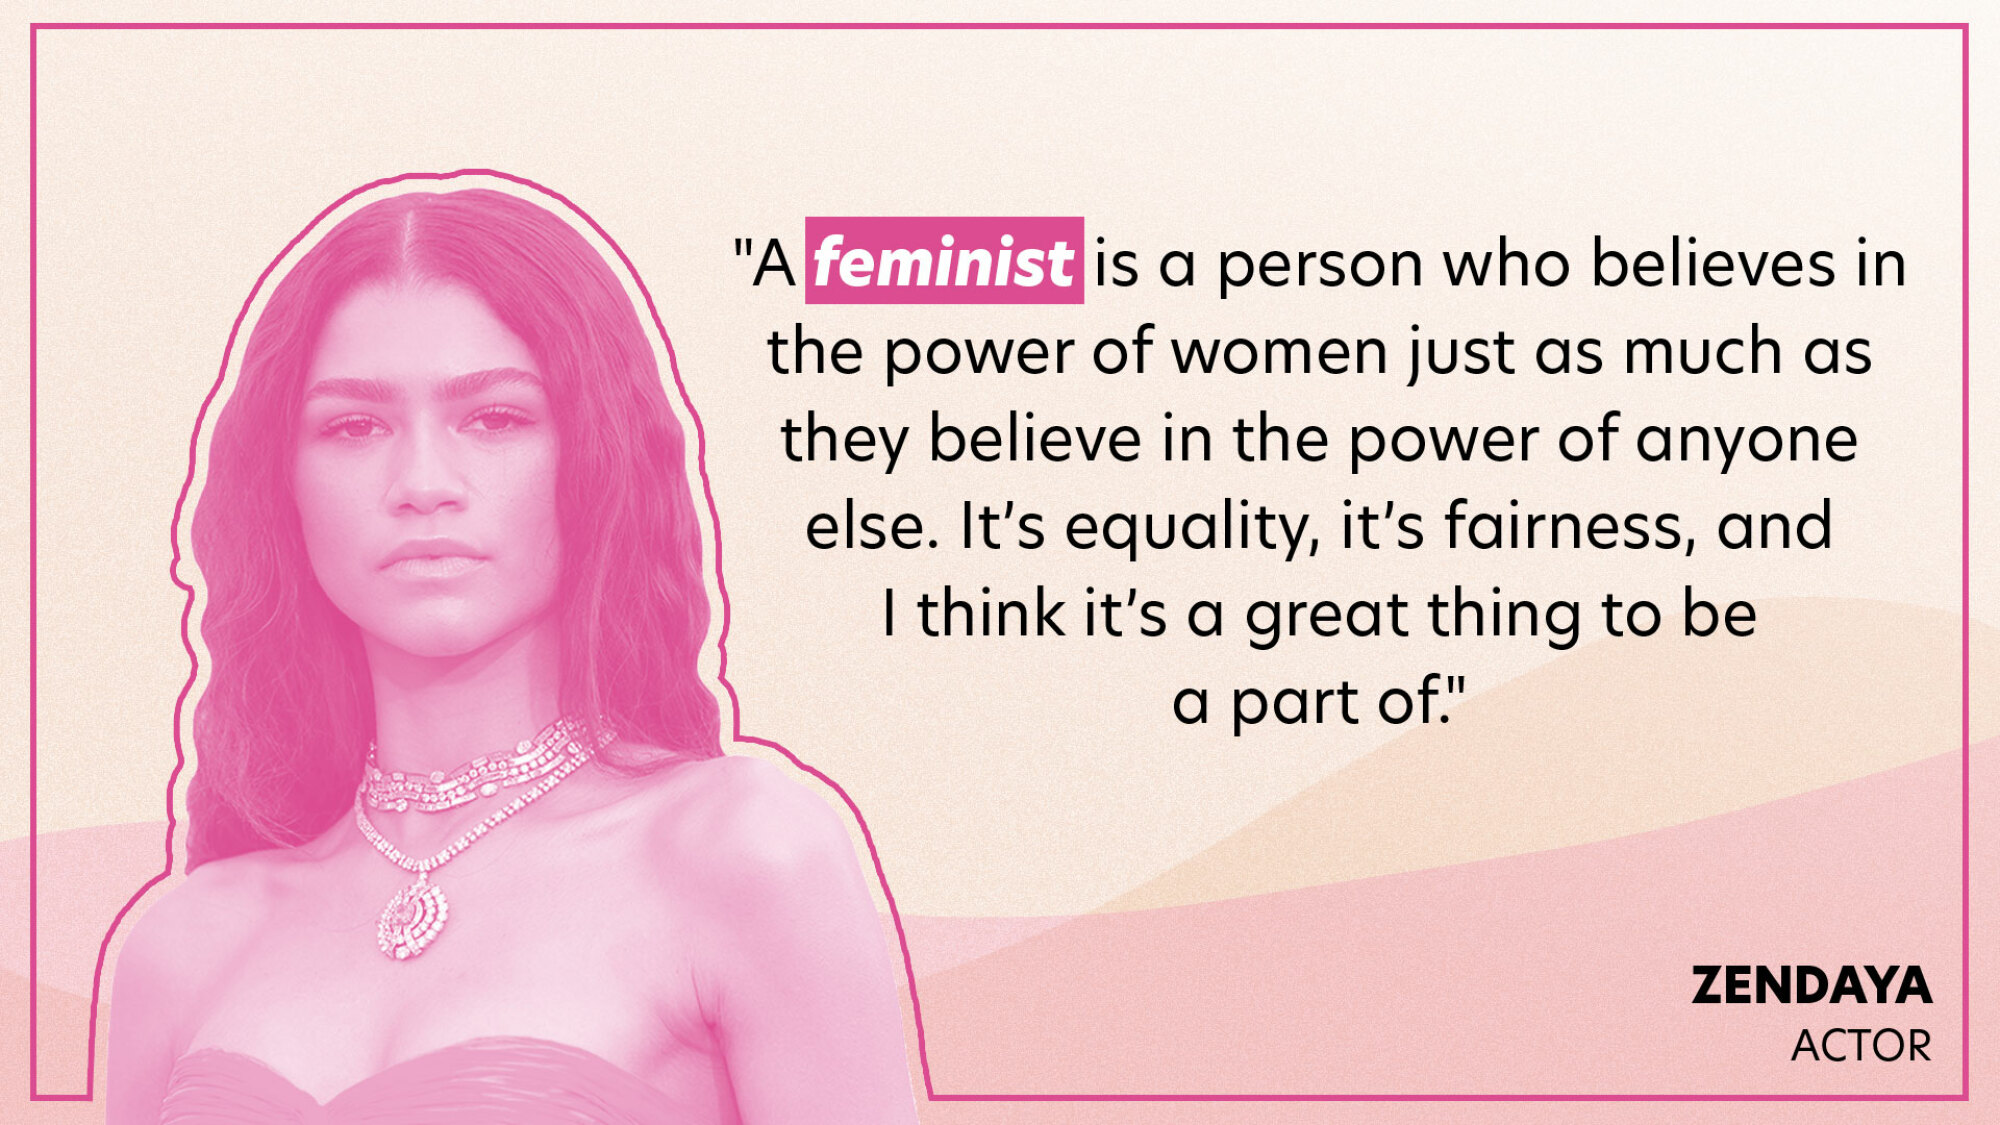 "A feminist is a person who believes in the power of women just as much as they believe in the power of anyone else. It’s equality, it’s fairness, and I think it’s a great thing to be a part of."